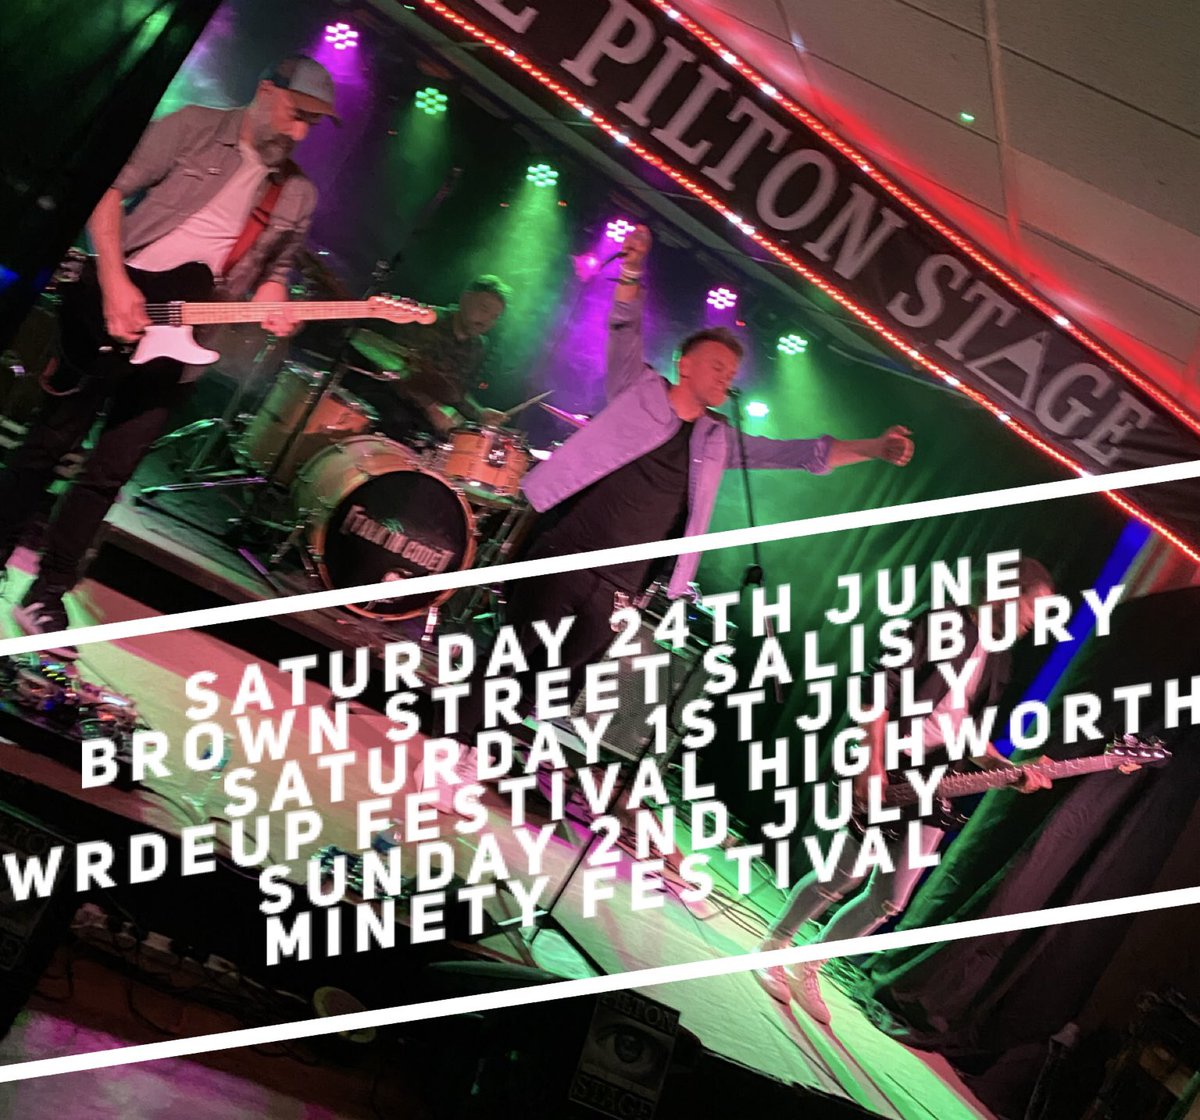 Upcoming shows…
@BrownStreetSP1 
@wrdeup 
@minetyfestival 
See you down the front 🎸🎸🎸🎤🥁 @RegentStRecords @HorusMusic @PhoenixMusicInt #livemusic #gigs #festivals #indiepop #summer2023 #proudtobeswindon